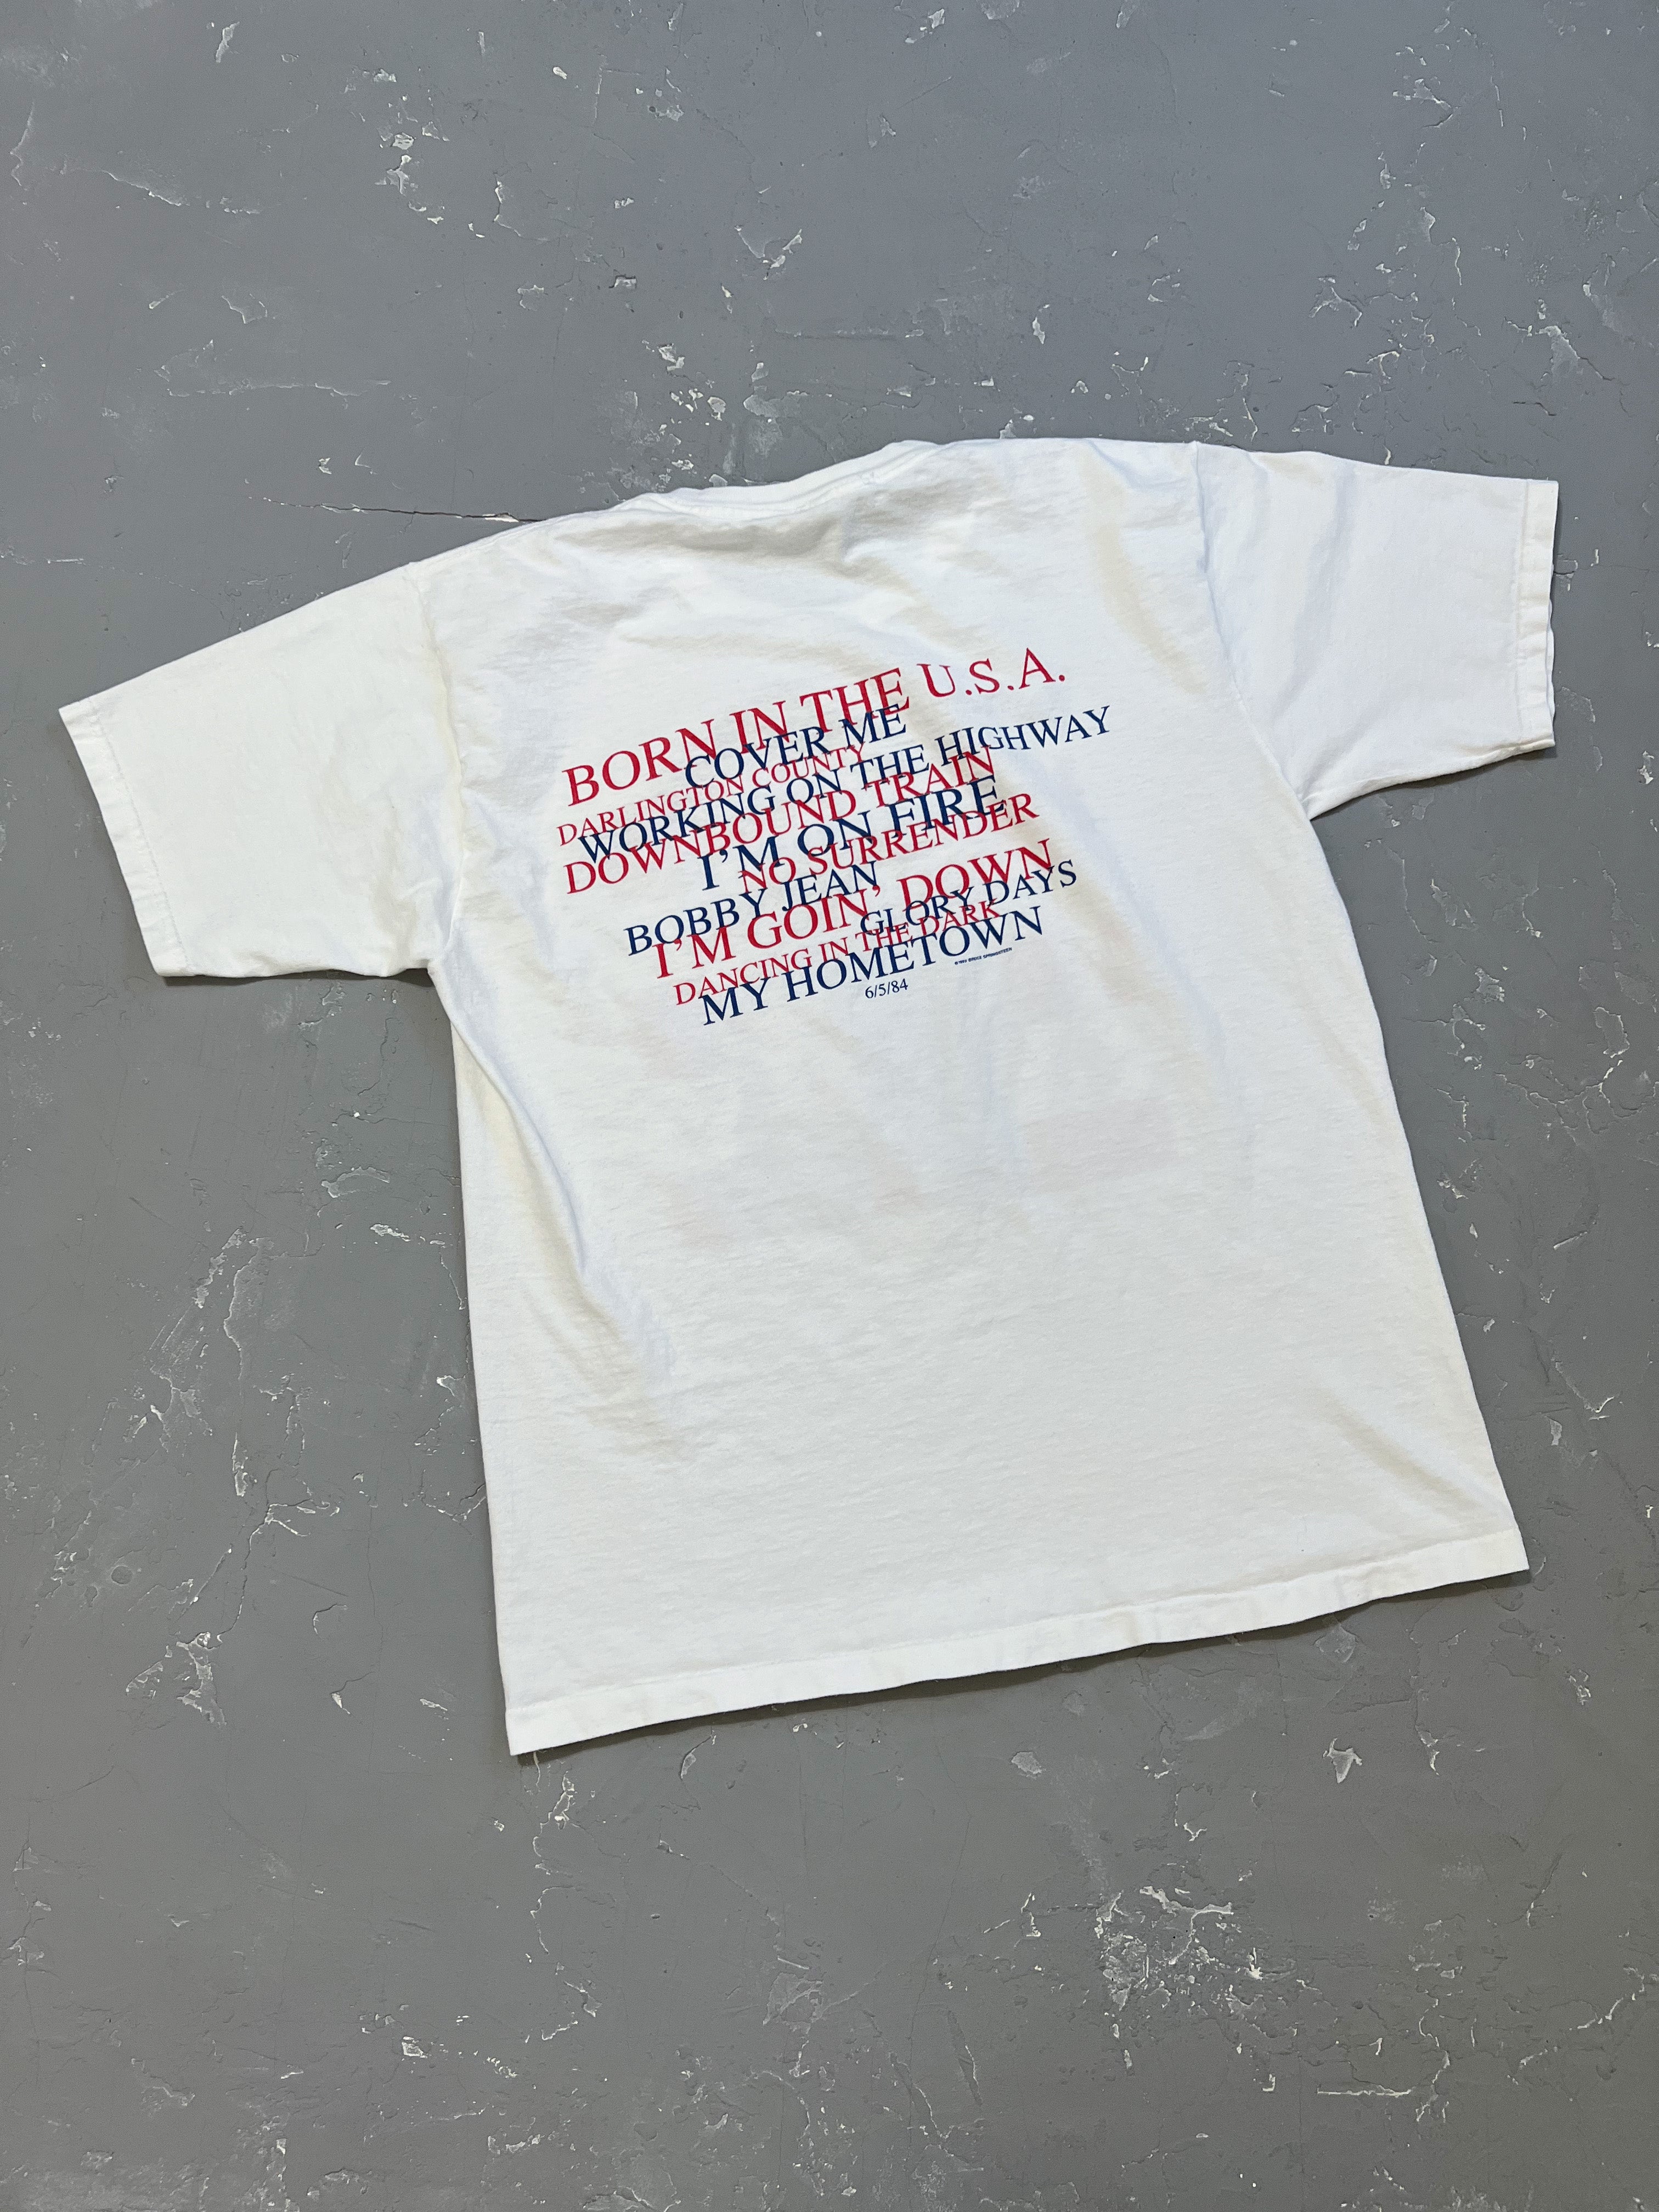 1999 Bruce Springsteen “Born in the USA” Tee [L]